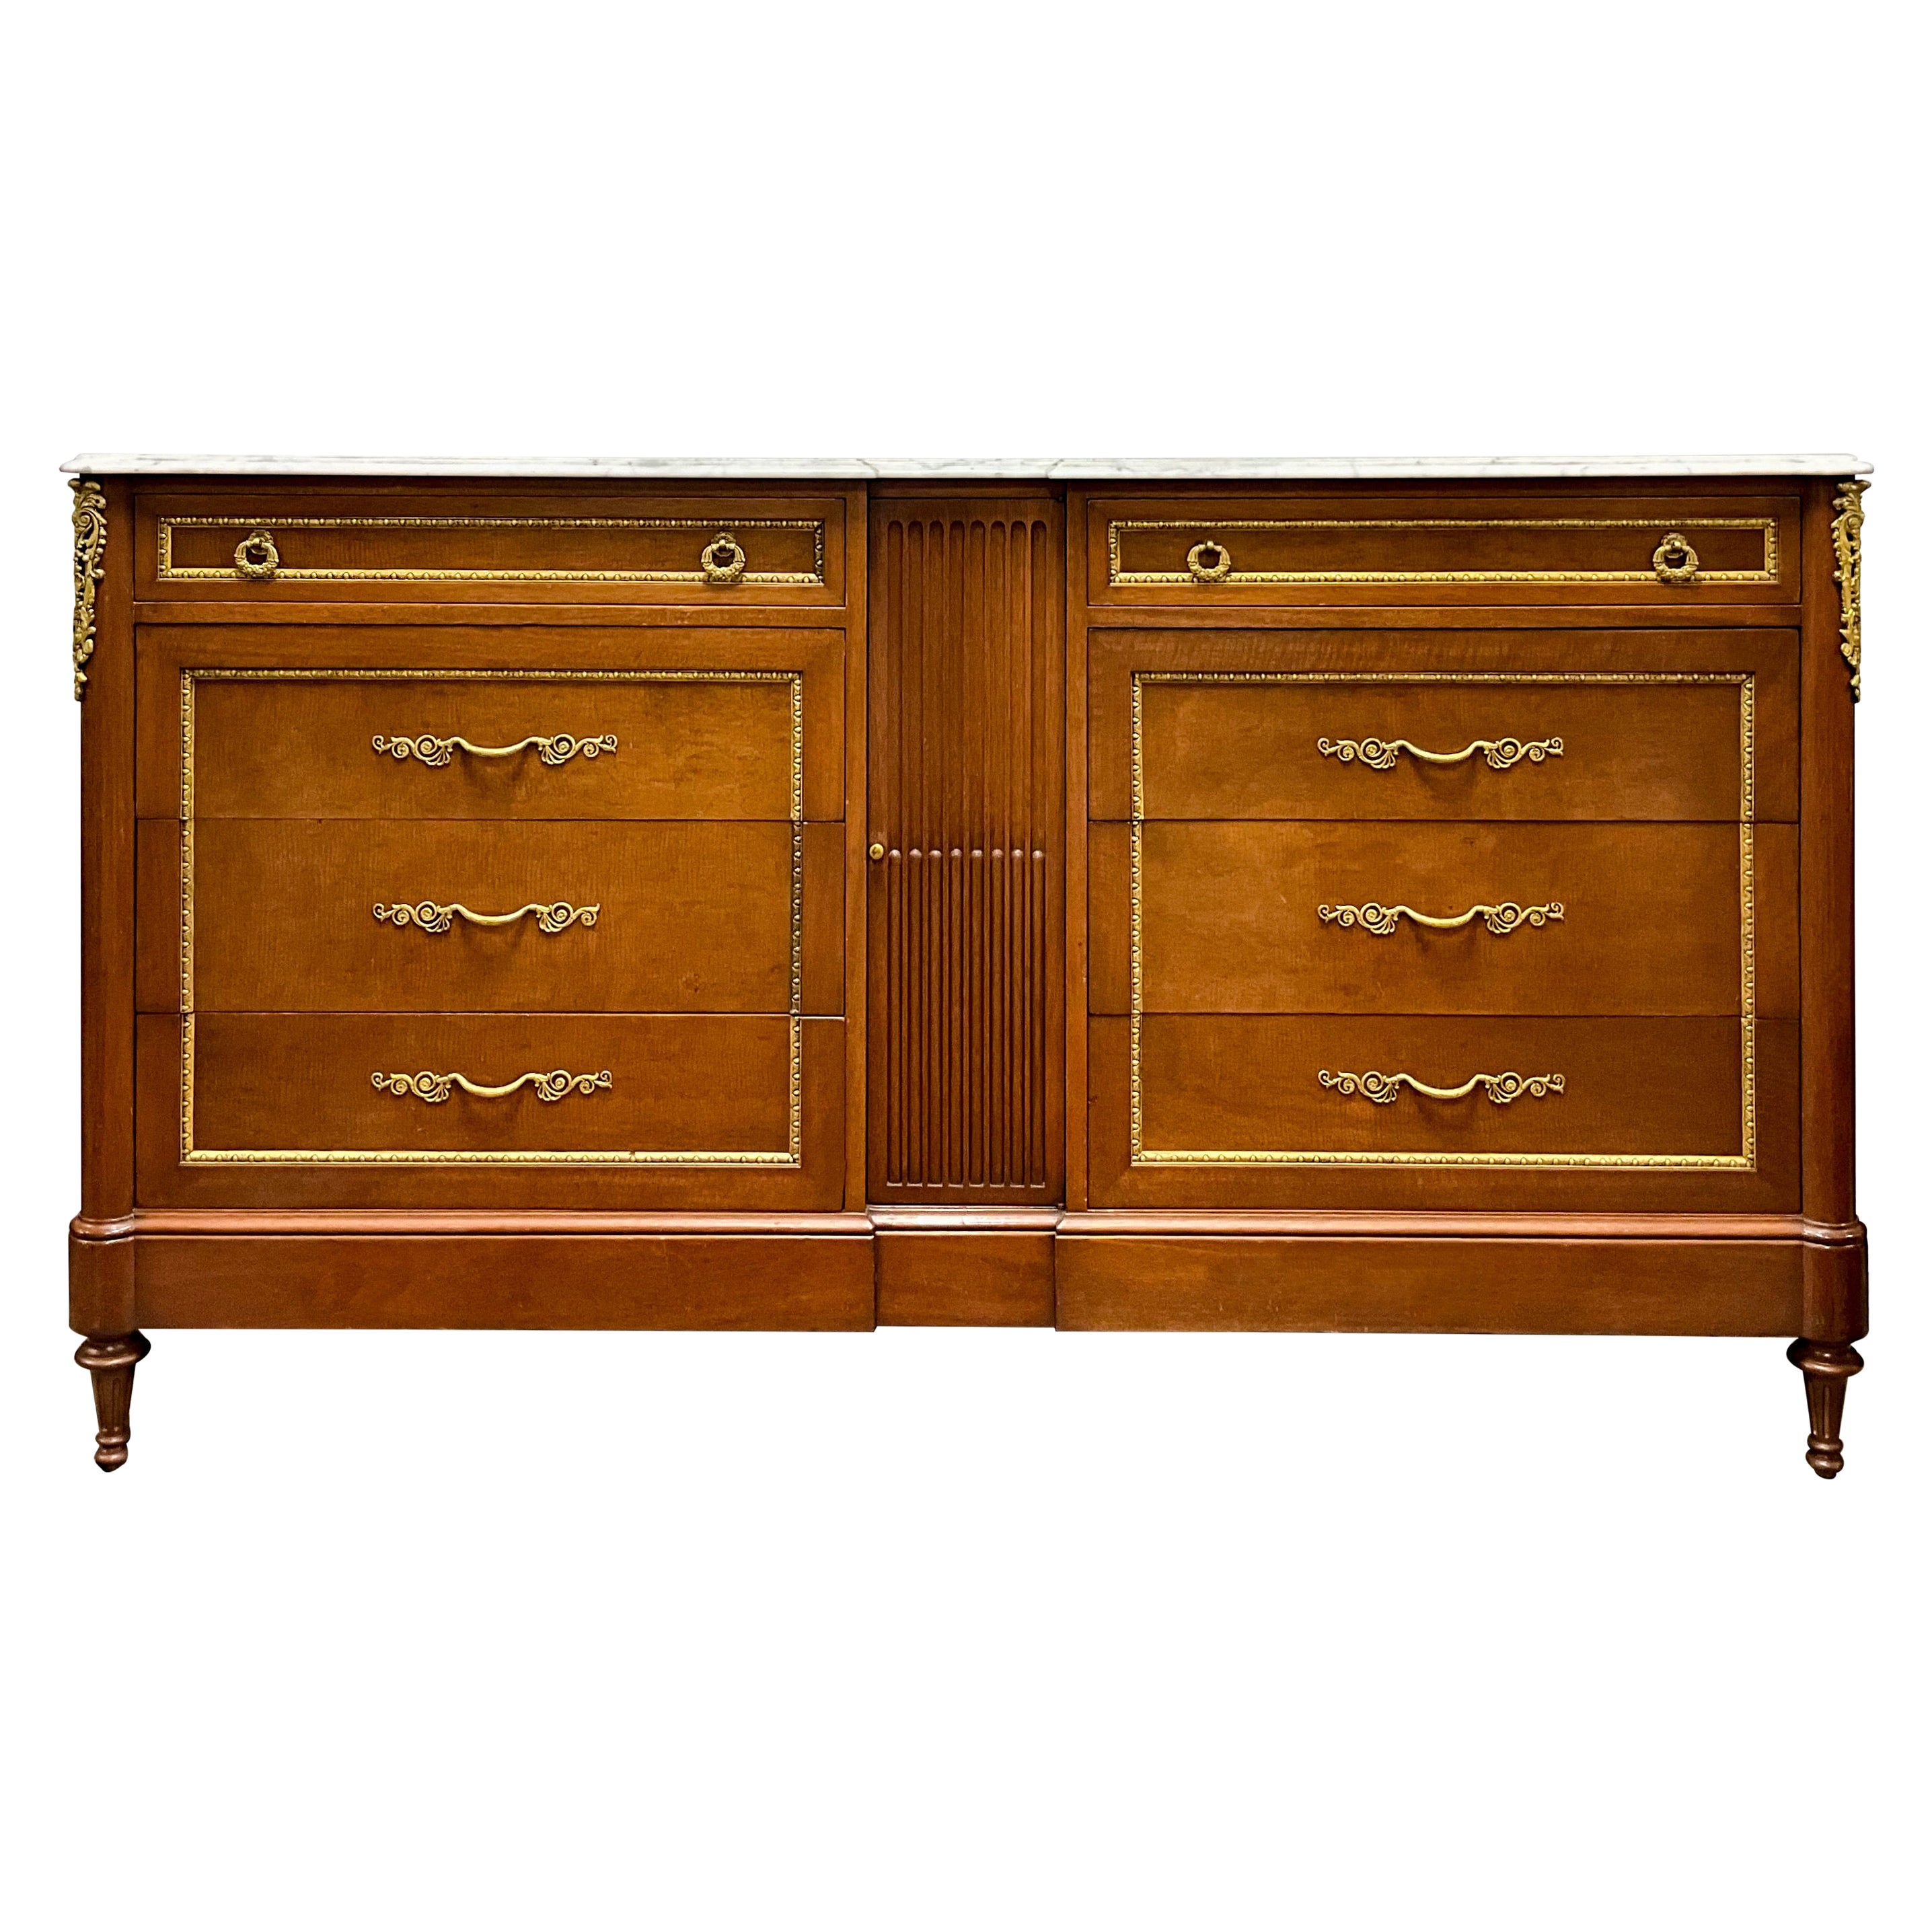 New York Maslow Freen French Style Walnut Gilt Bronze Marble Top Chest / Commode For Sale